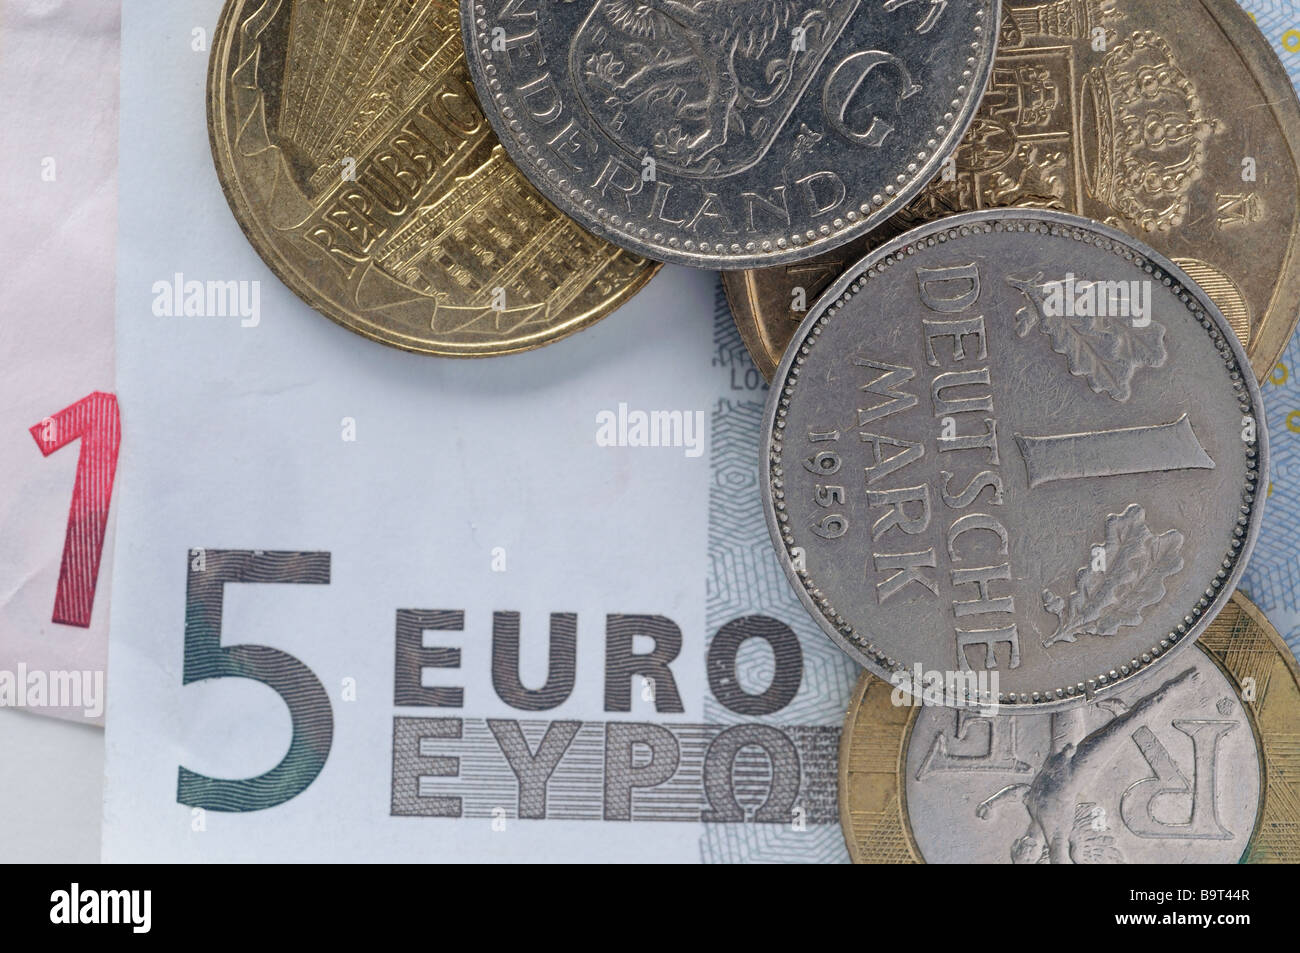 A euro banknote with old european coins Stock Photo